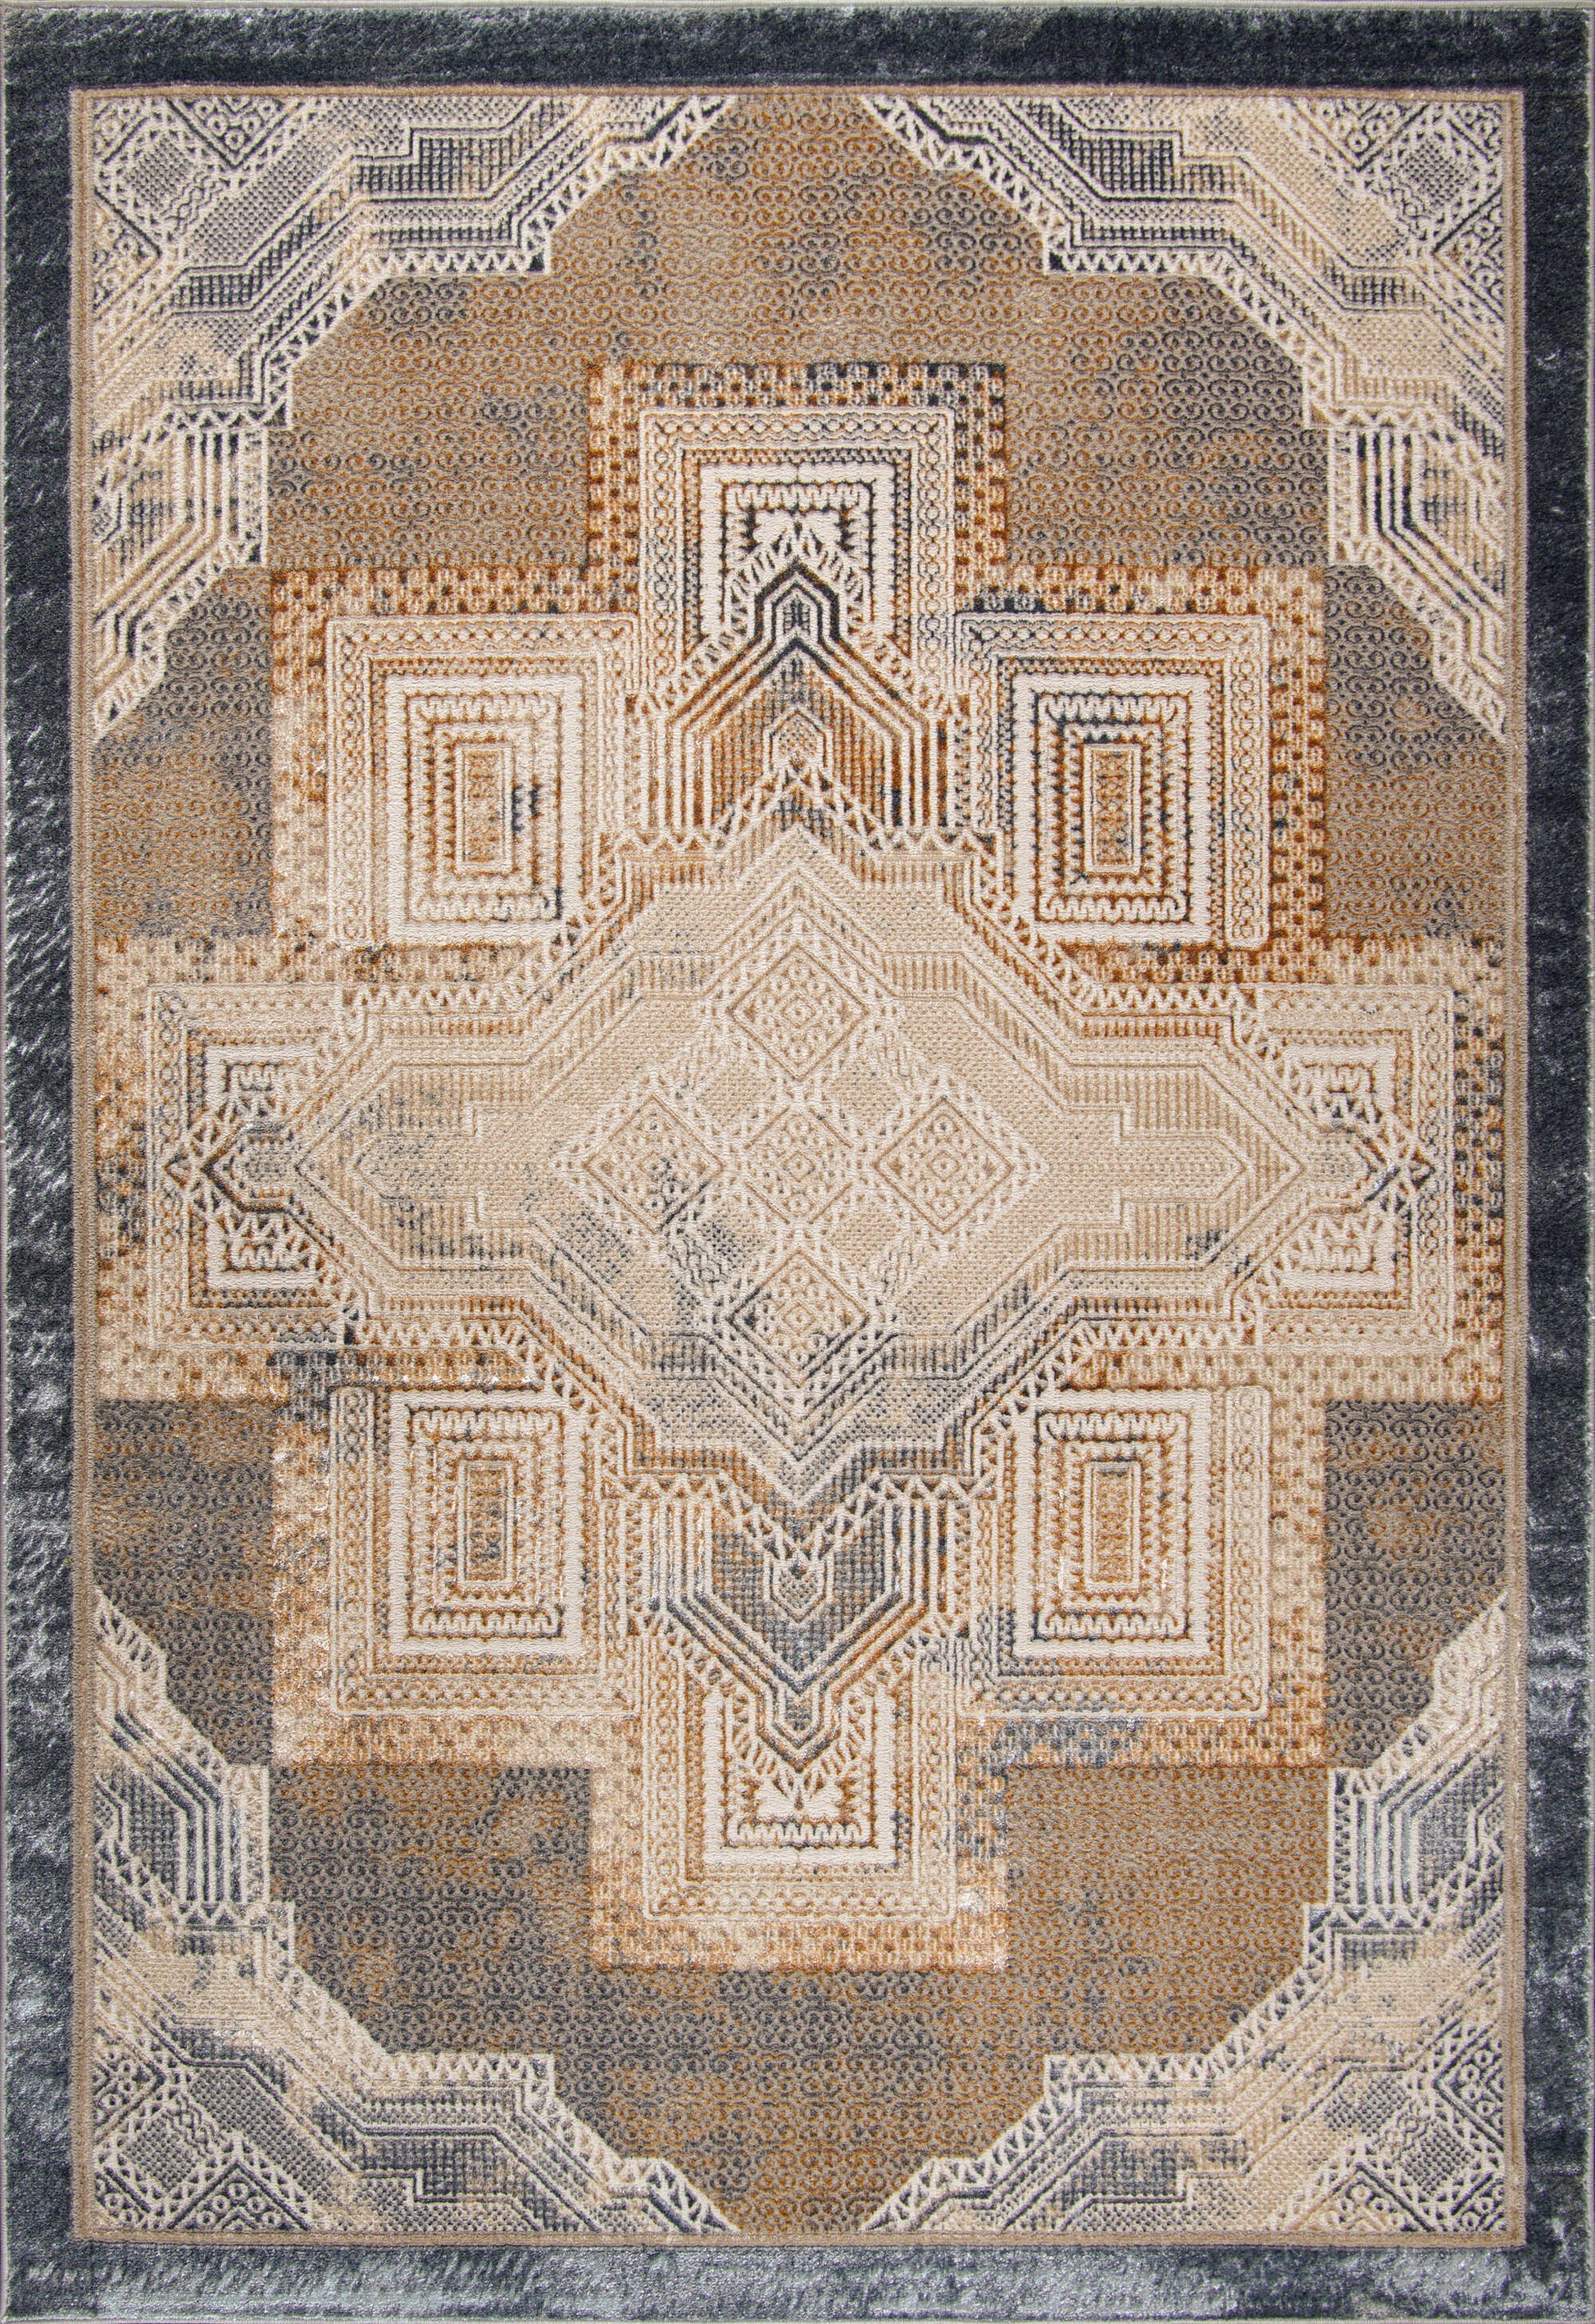 beige brown silver grey metalic traditional geometric contemporary area rug 2x8, 3x10, 2x10 ft Long Runner Rug, Hallway, Balcony, Entry Way, Kitchen, Stairs